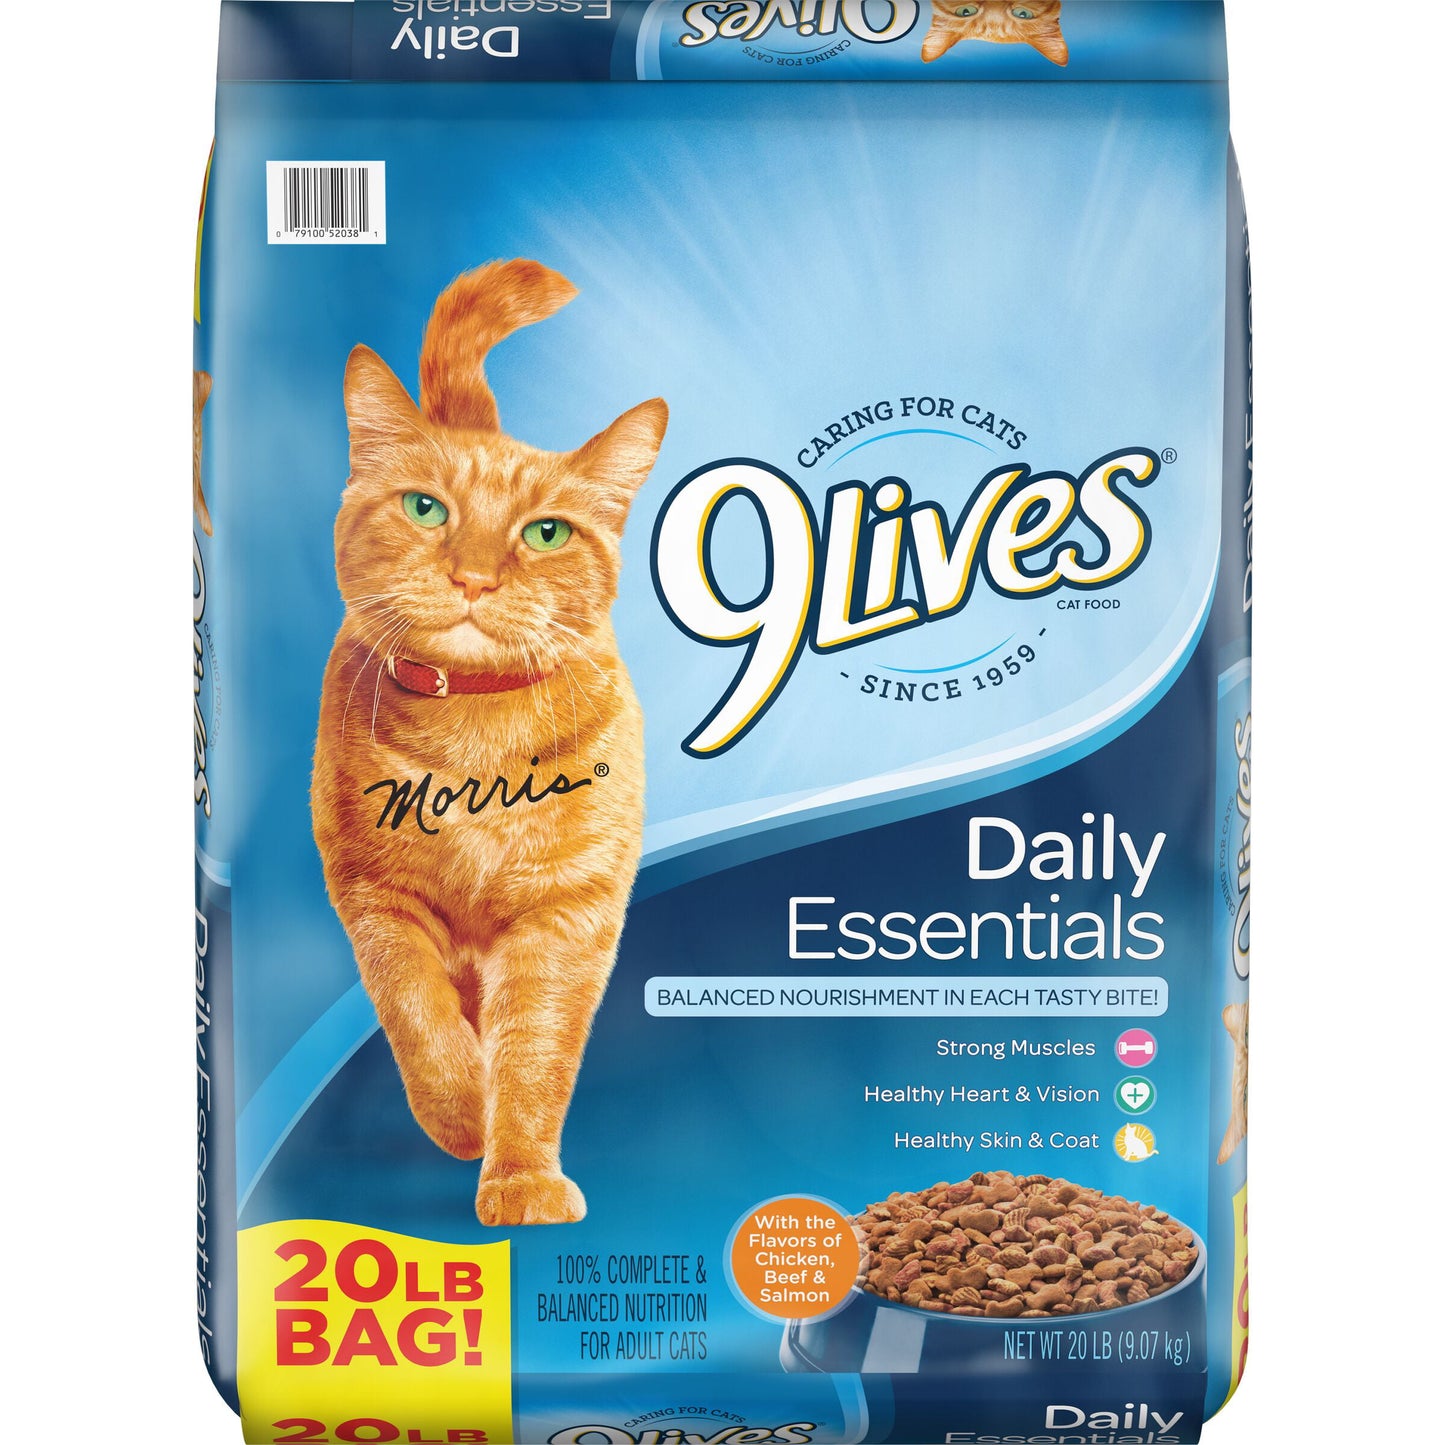 9Lives Daily Essentials Dry Cat Food With Chicken, Beef & Salmon Flavors, 15.5 lb Bag